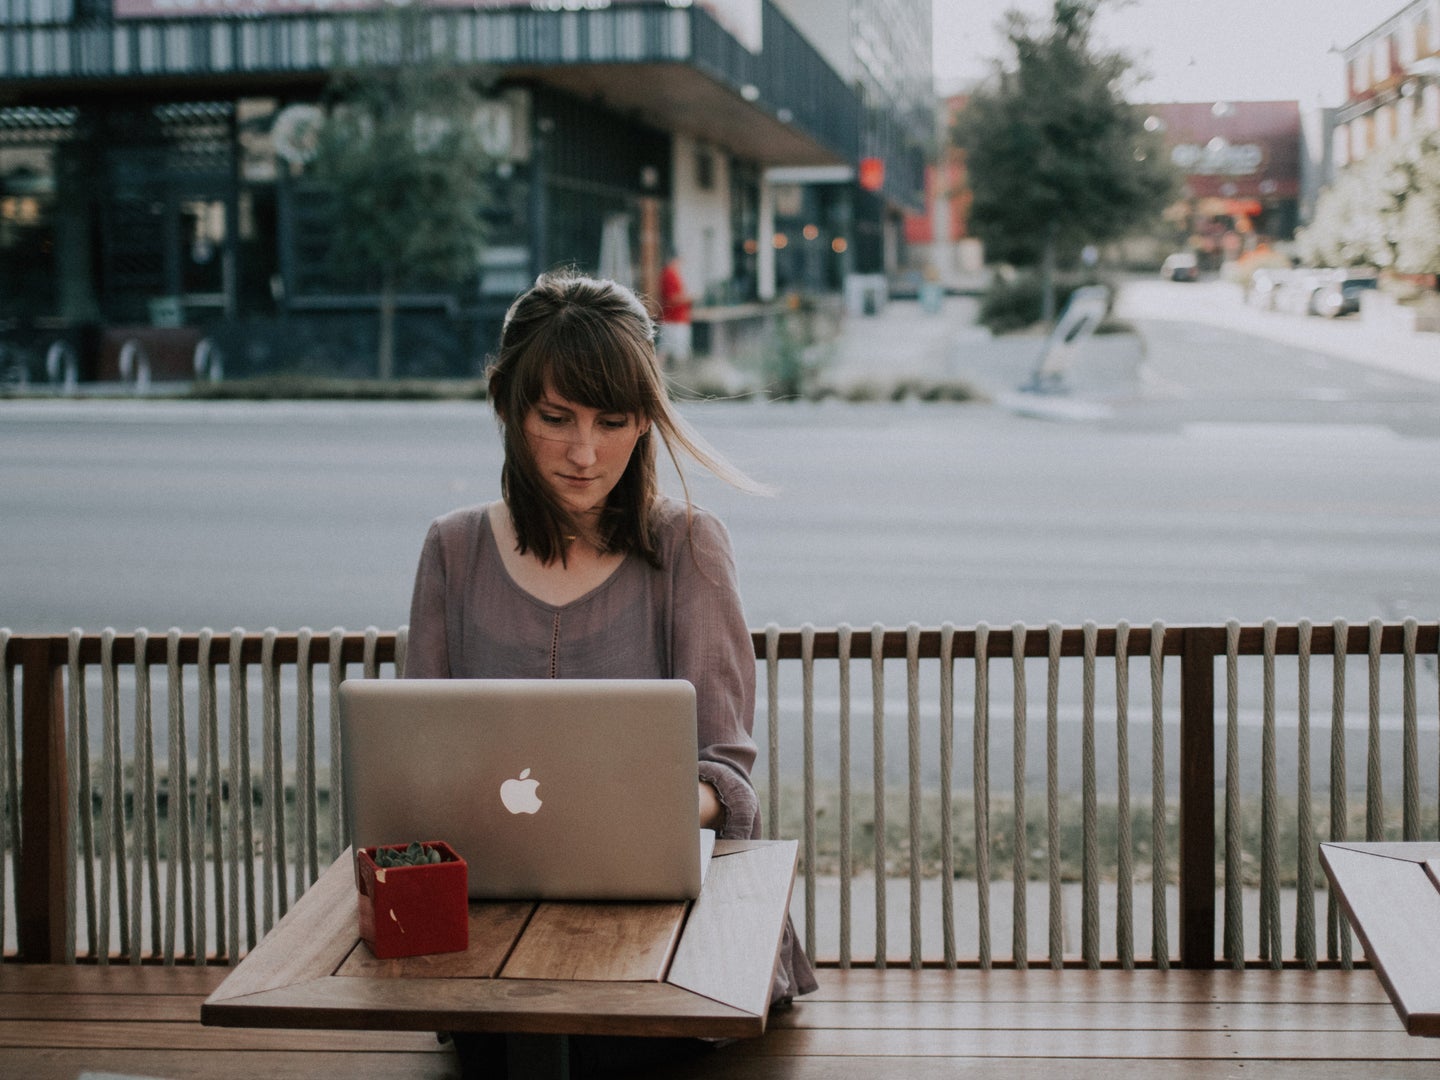 A young woman sitting outside a coffee shop on a patio by the street, using a silver Macbook on a wooden table.